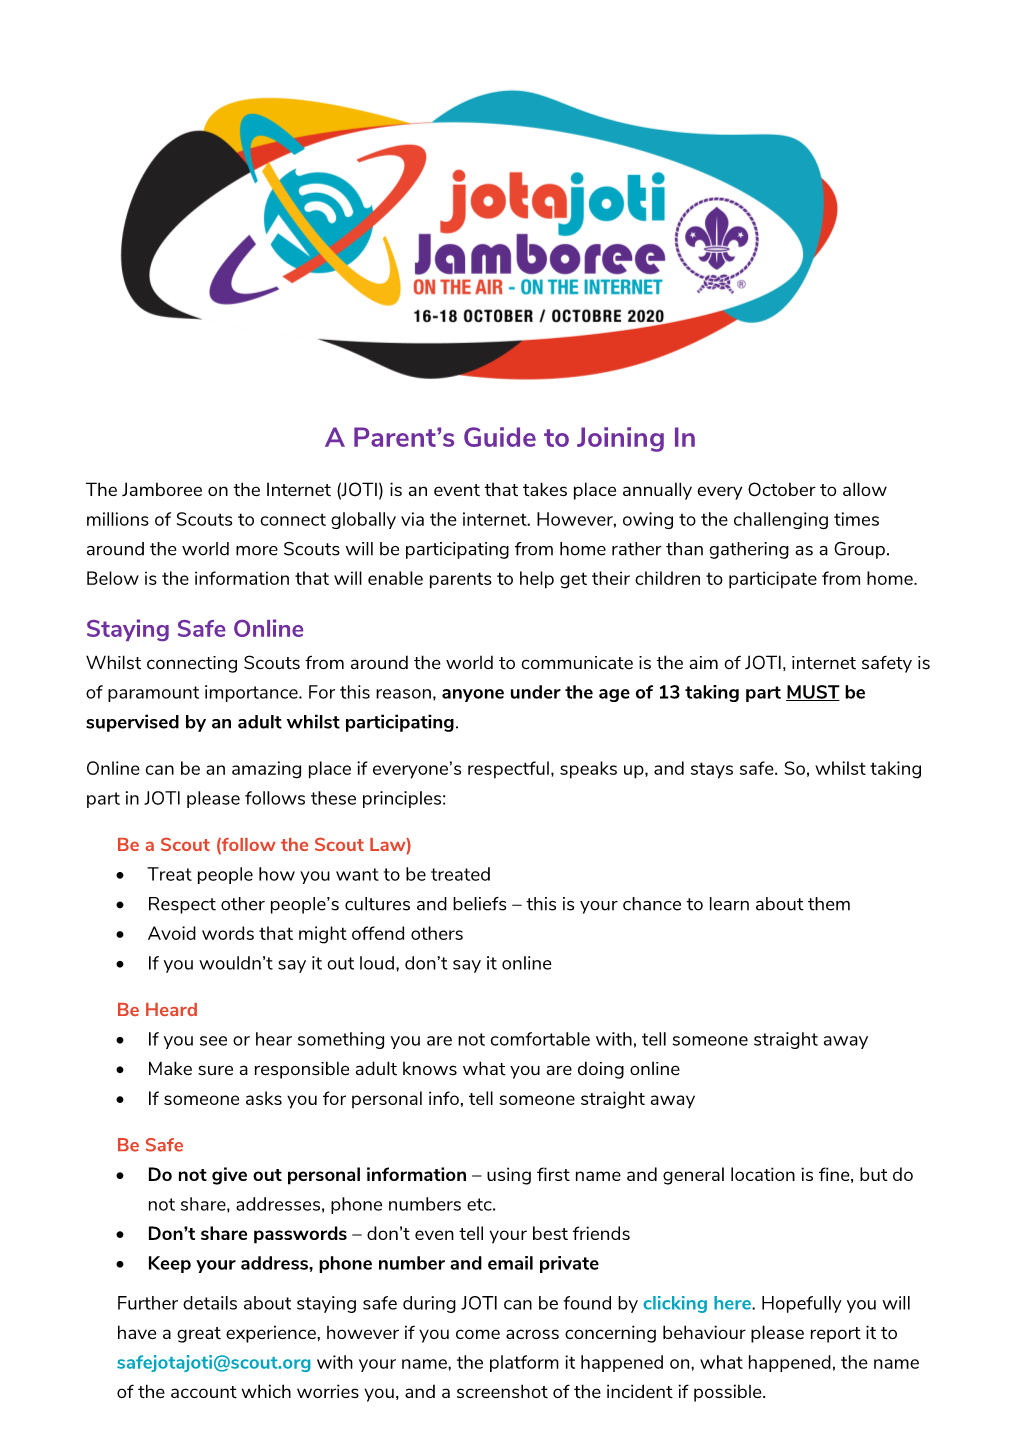 A Parent's Guide to Joining In